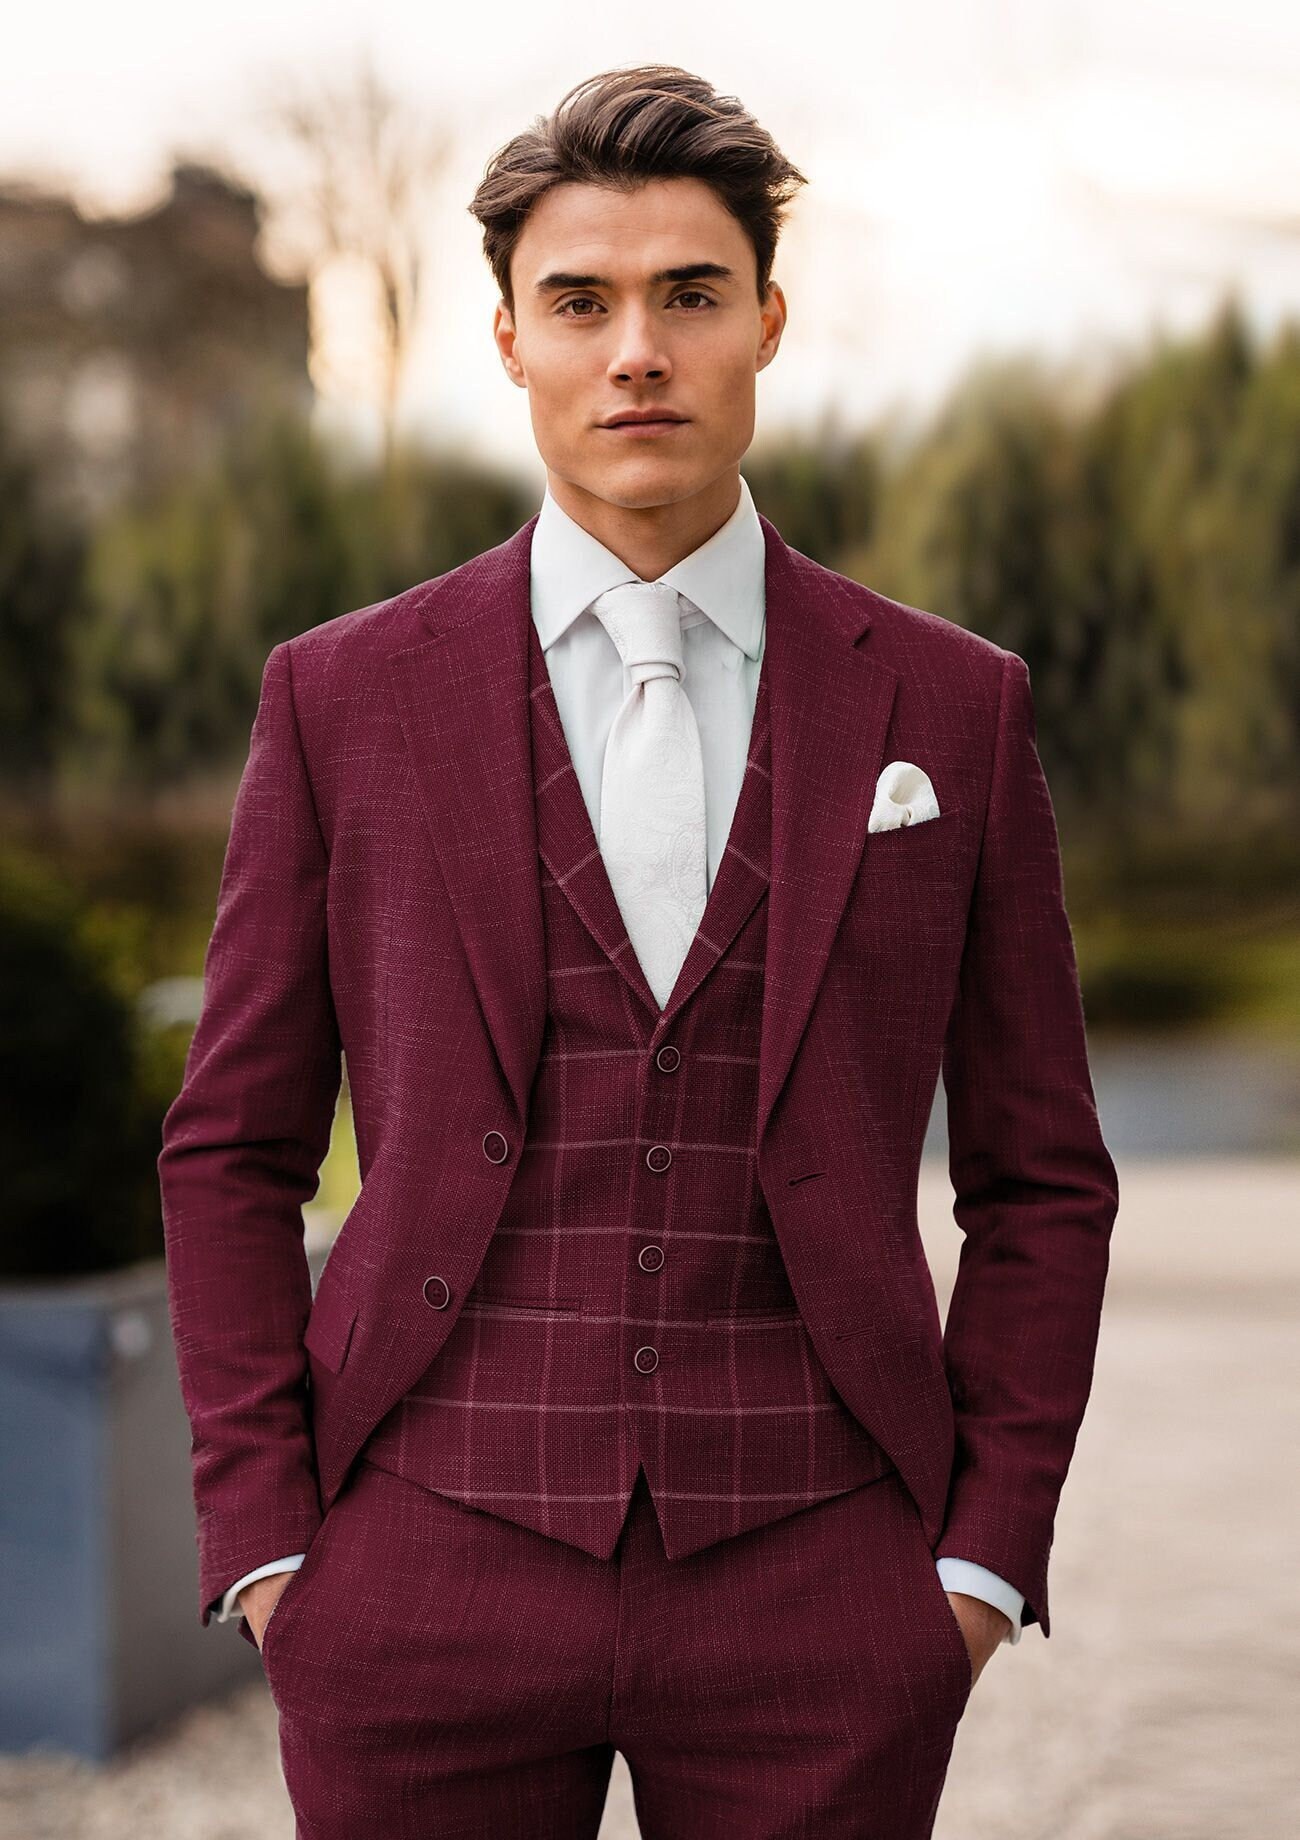 How to wear a red suit? – Flex Suits